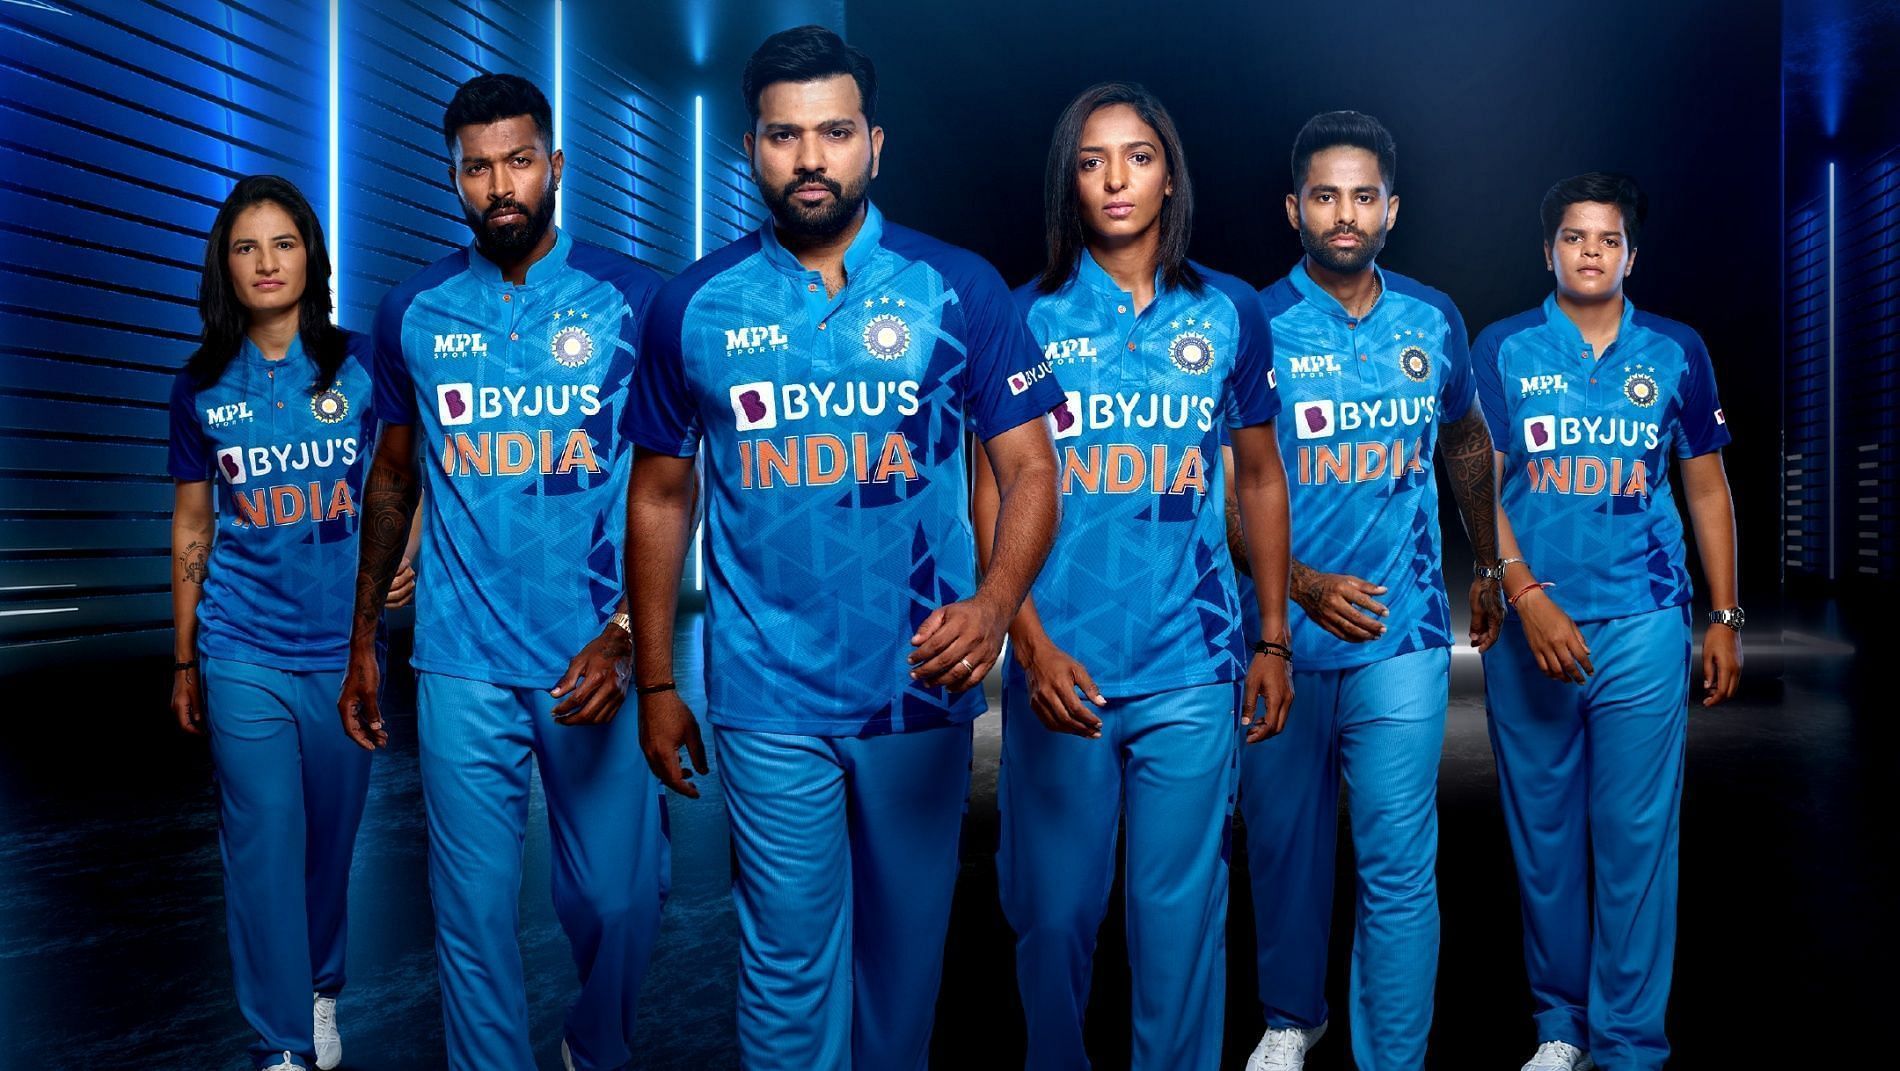 The 2022 T20 World Cup jersey worn by Team India. Pic: BCCI